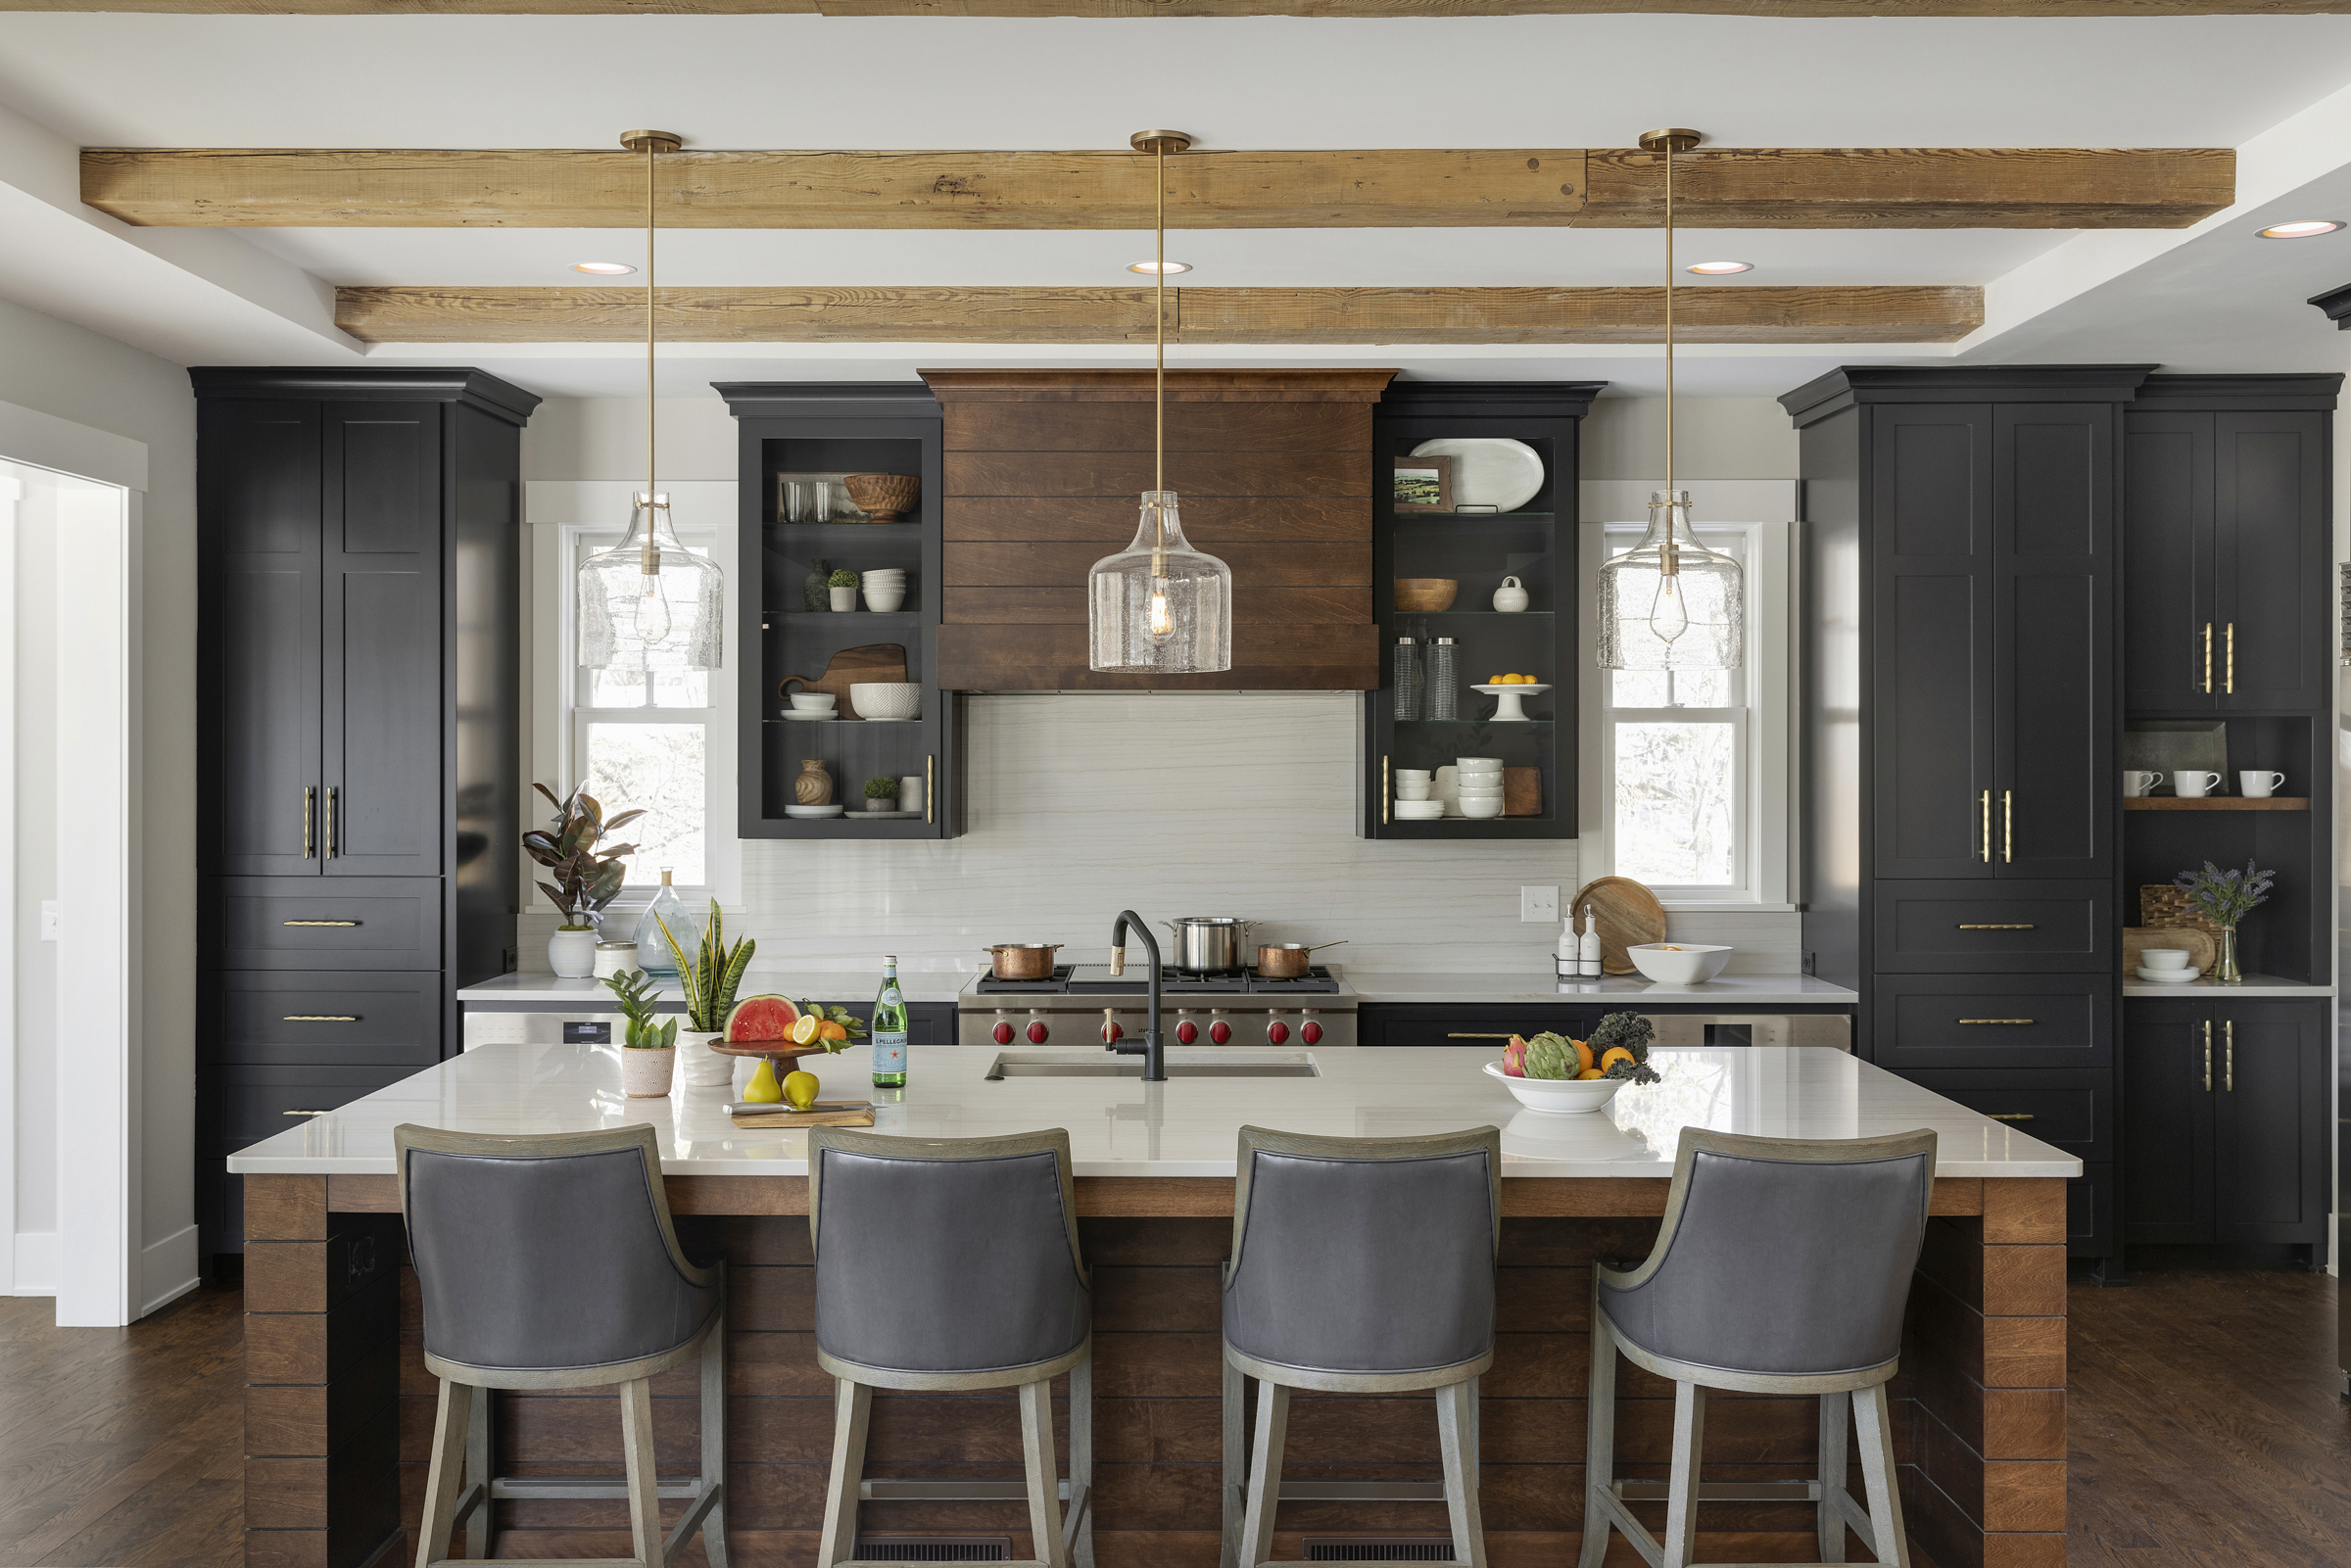 A kitchen with black cabinets and wooden beams.